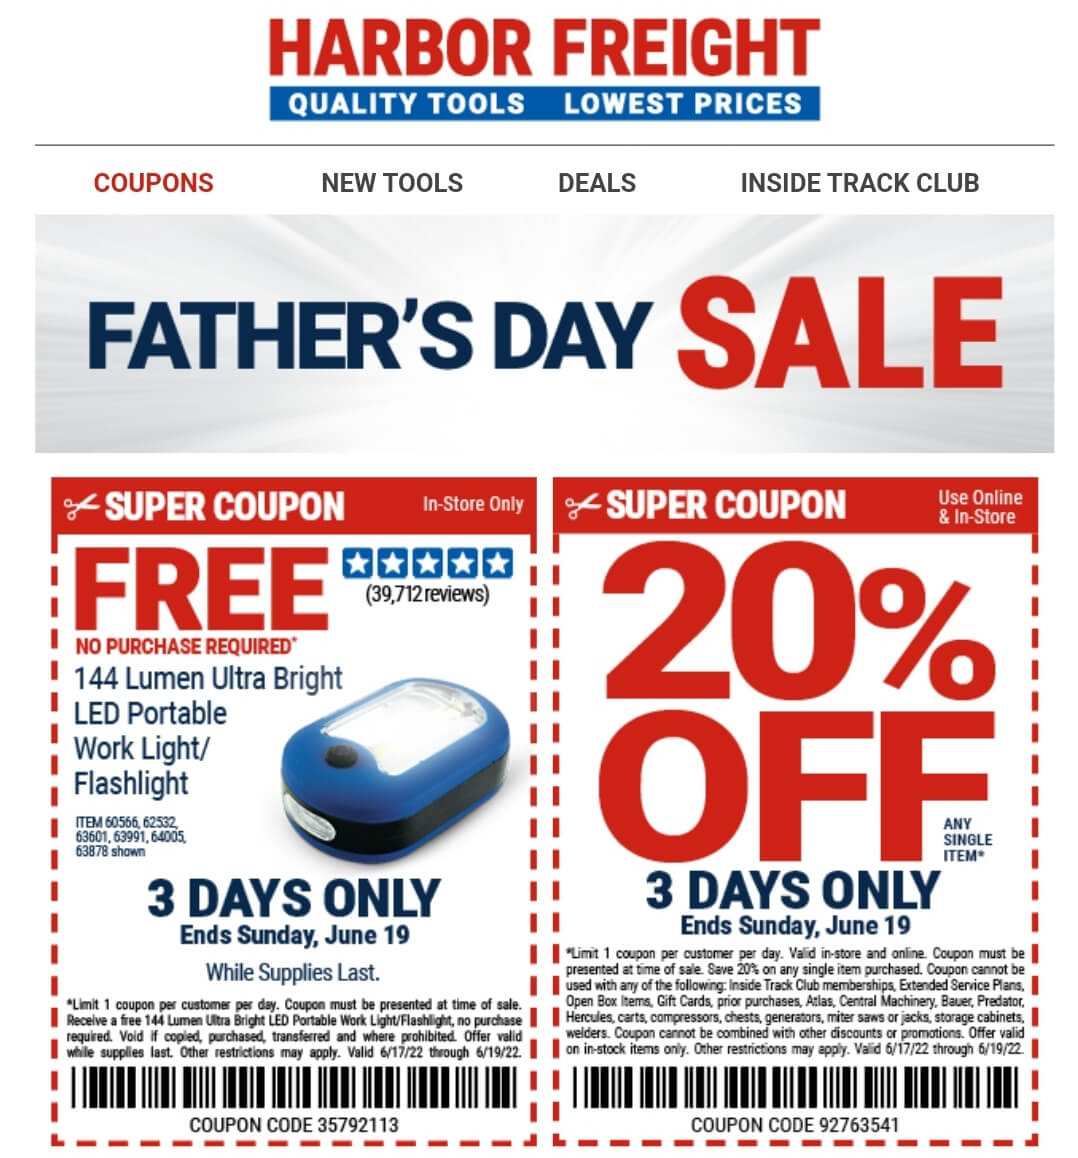 Harbor Freight stores Coupon  20% off a single item at Harbor Freight Tools, or online via promo code 92763541 #harborfreight 